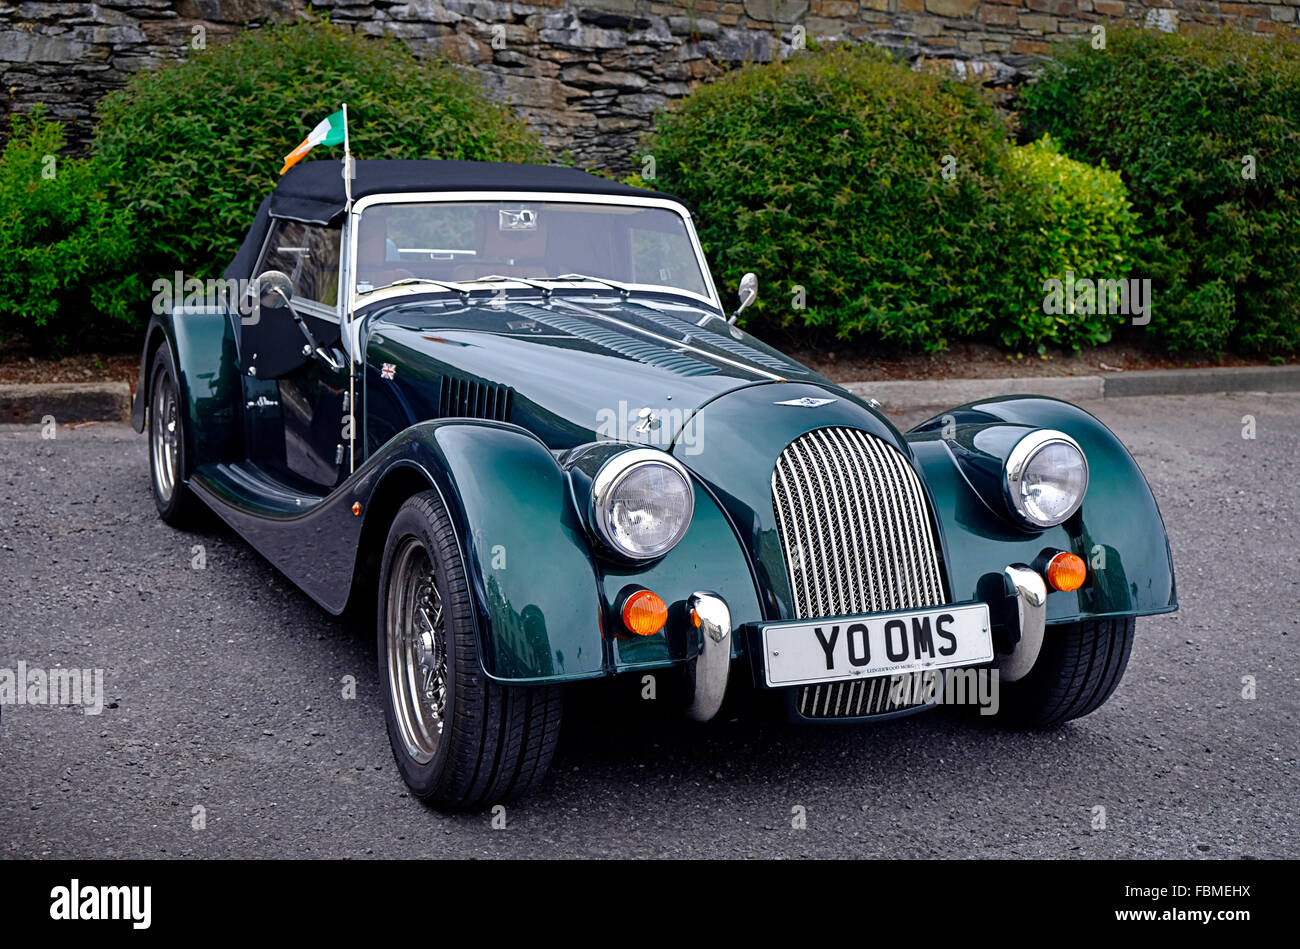 Racing green colored Morgan sports car pictured in West Cork Ireland.  British made famous marque Stock Photo